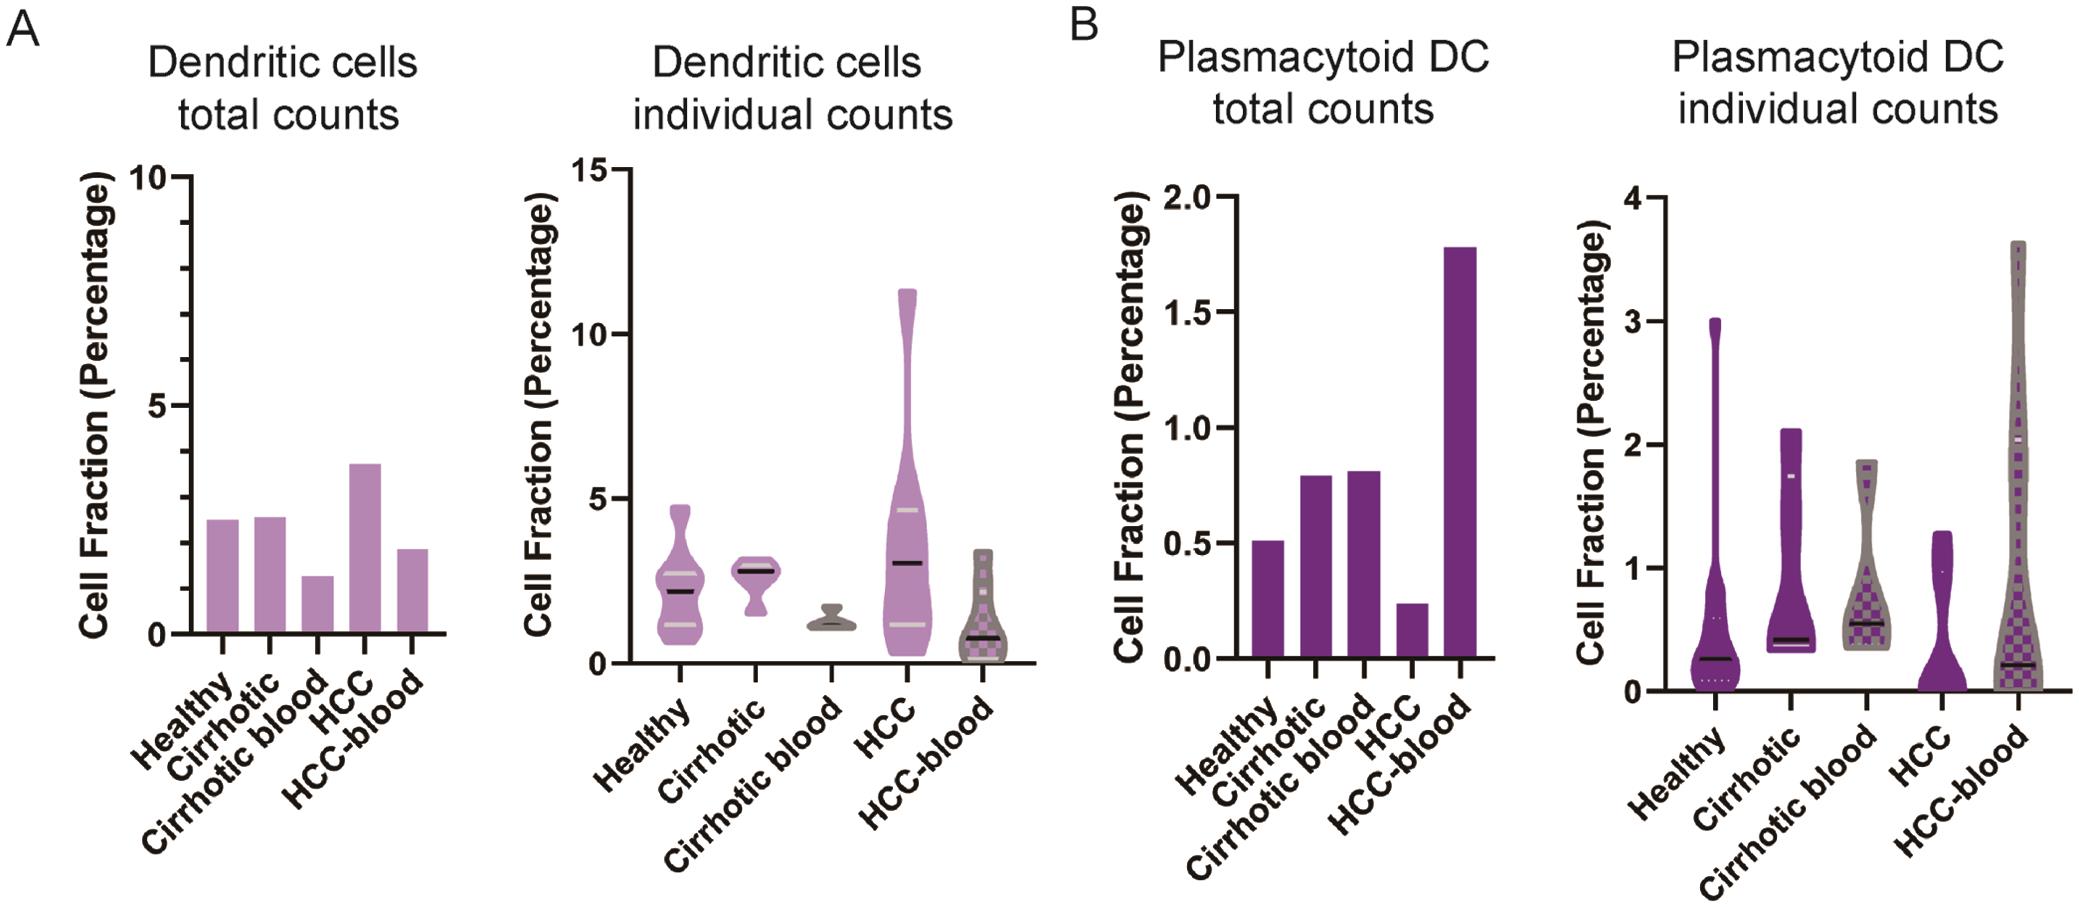 Dendritic cells were non-differentially observed in all sample types.